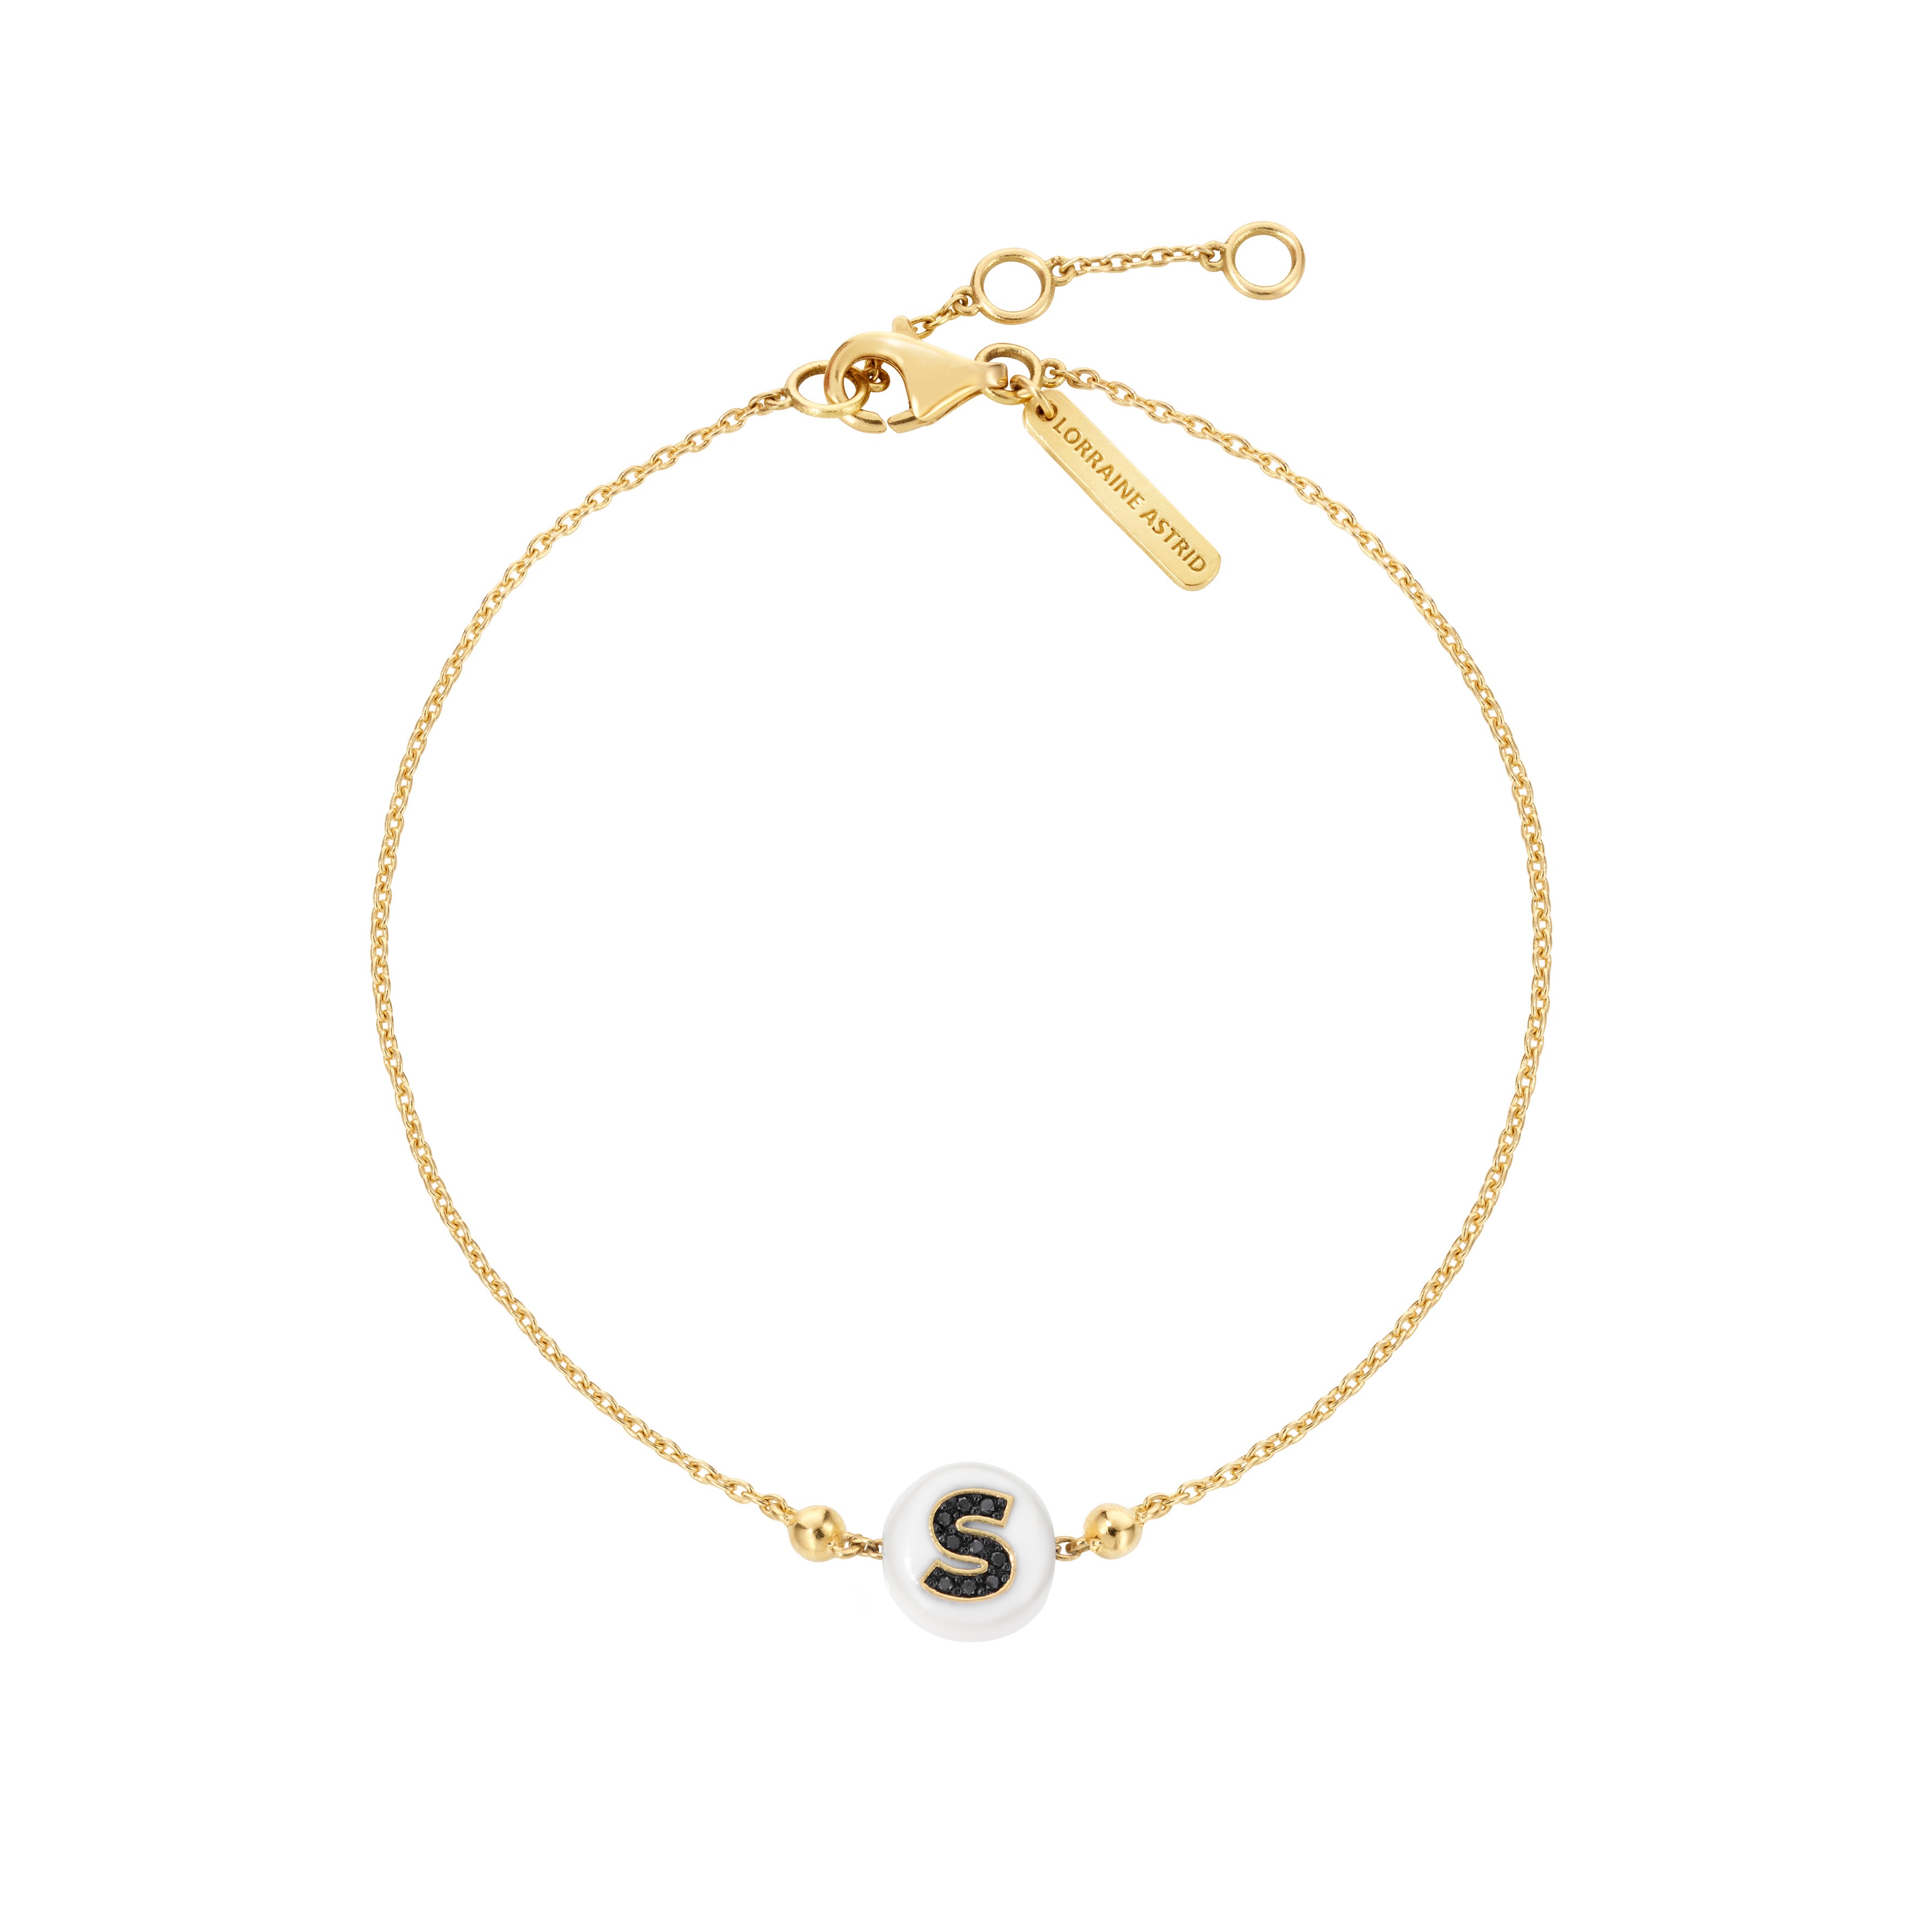 Children's Bracelet with one Letter bead on chain in 18K yellow gold